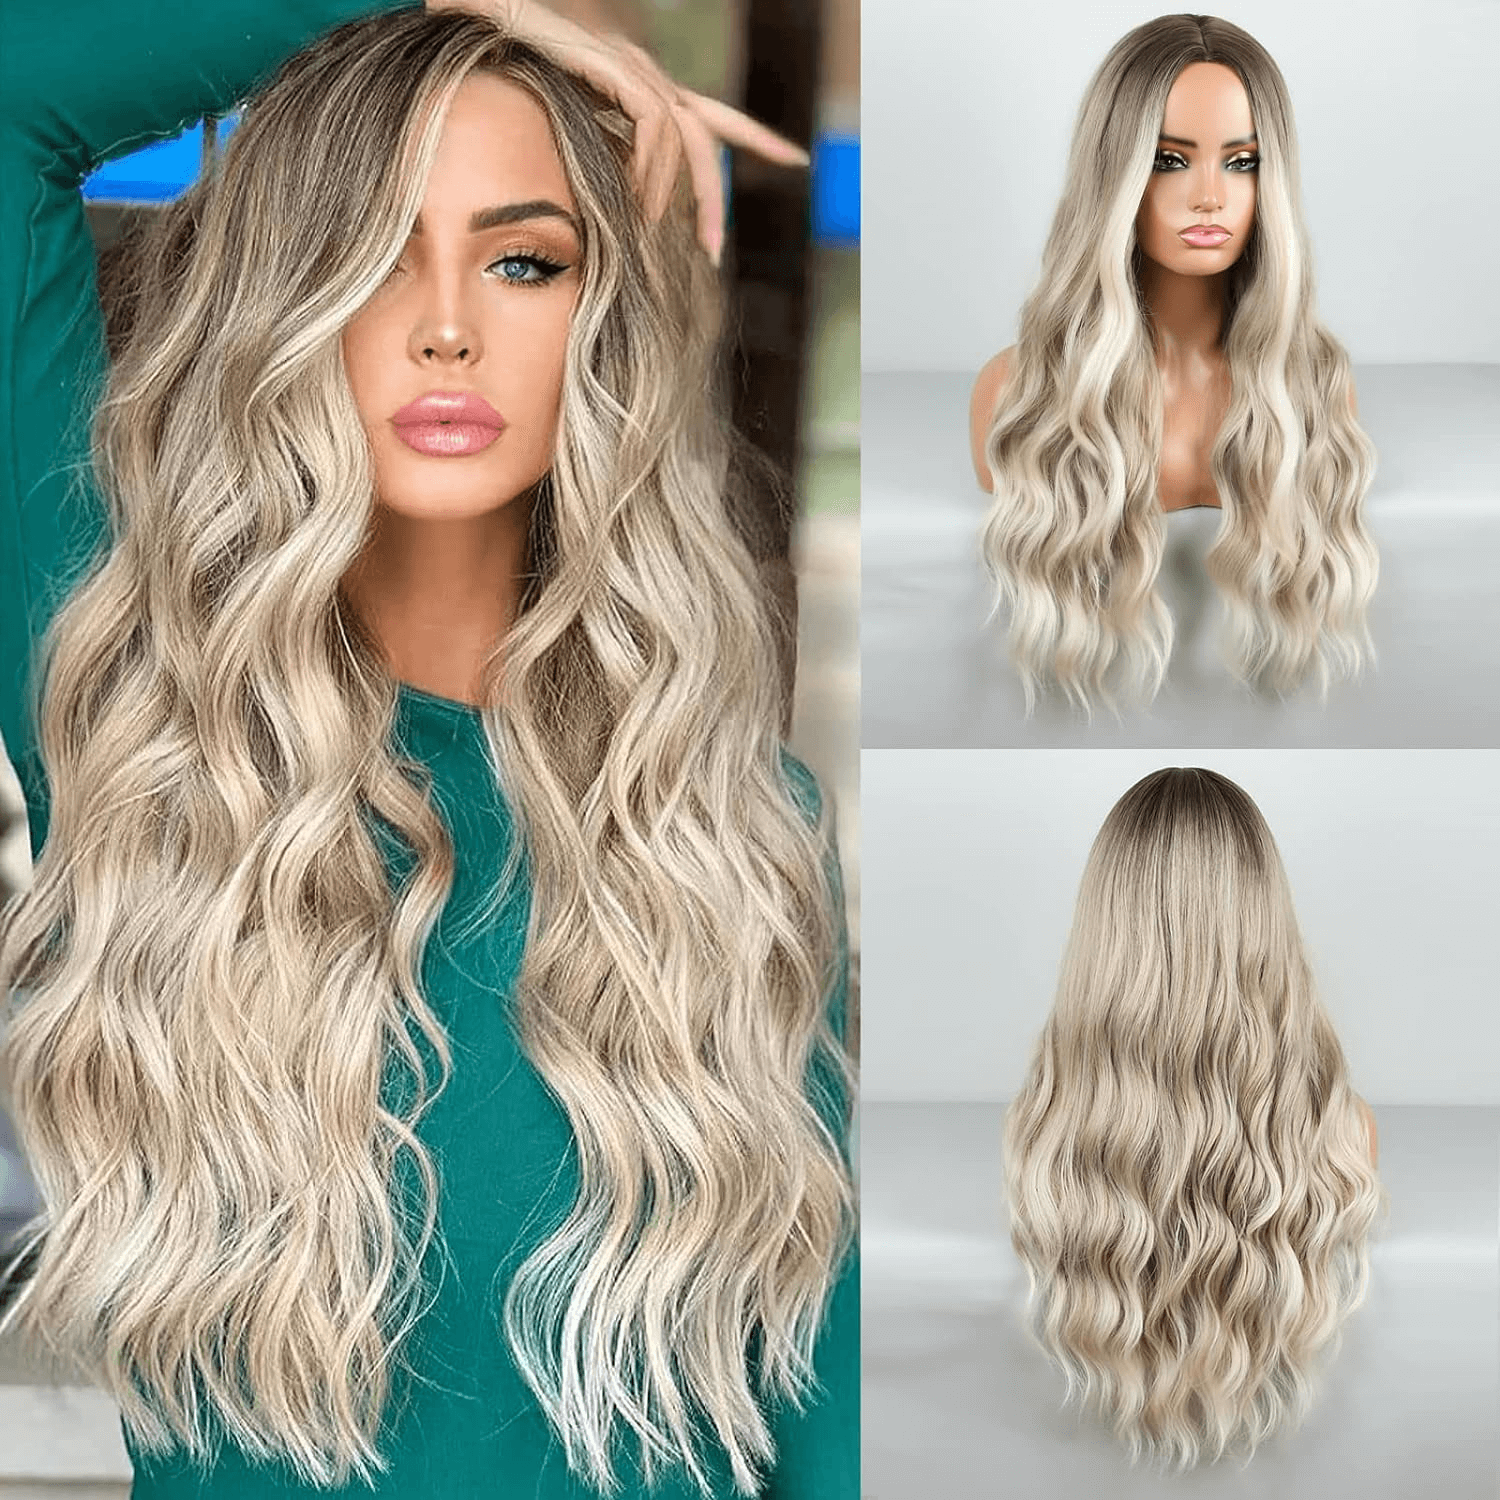 Ombre Strawberry Blonde Wig Long Wavy Wigs For Women Middle Part Wavy Wigs Synthetic Heat Resistant Party Wigs Natural looking